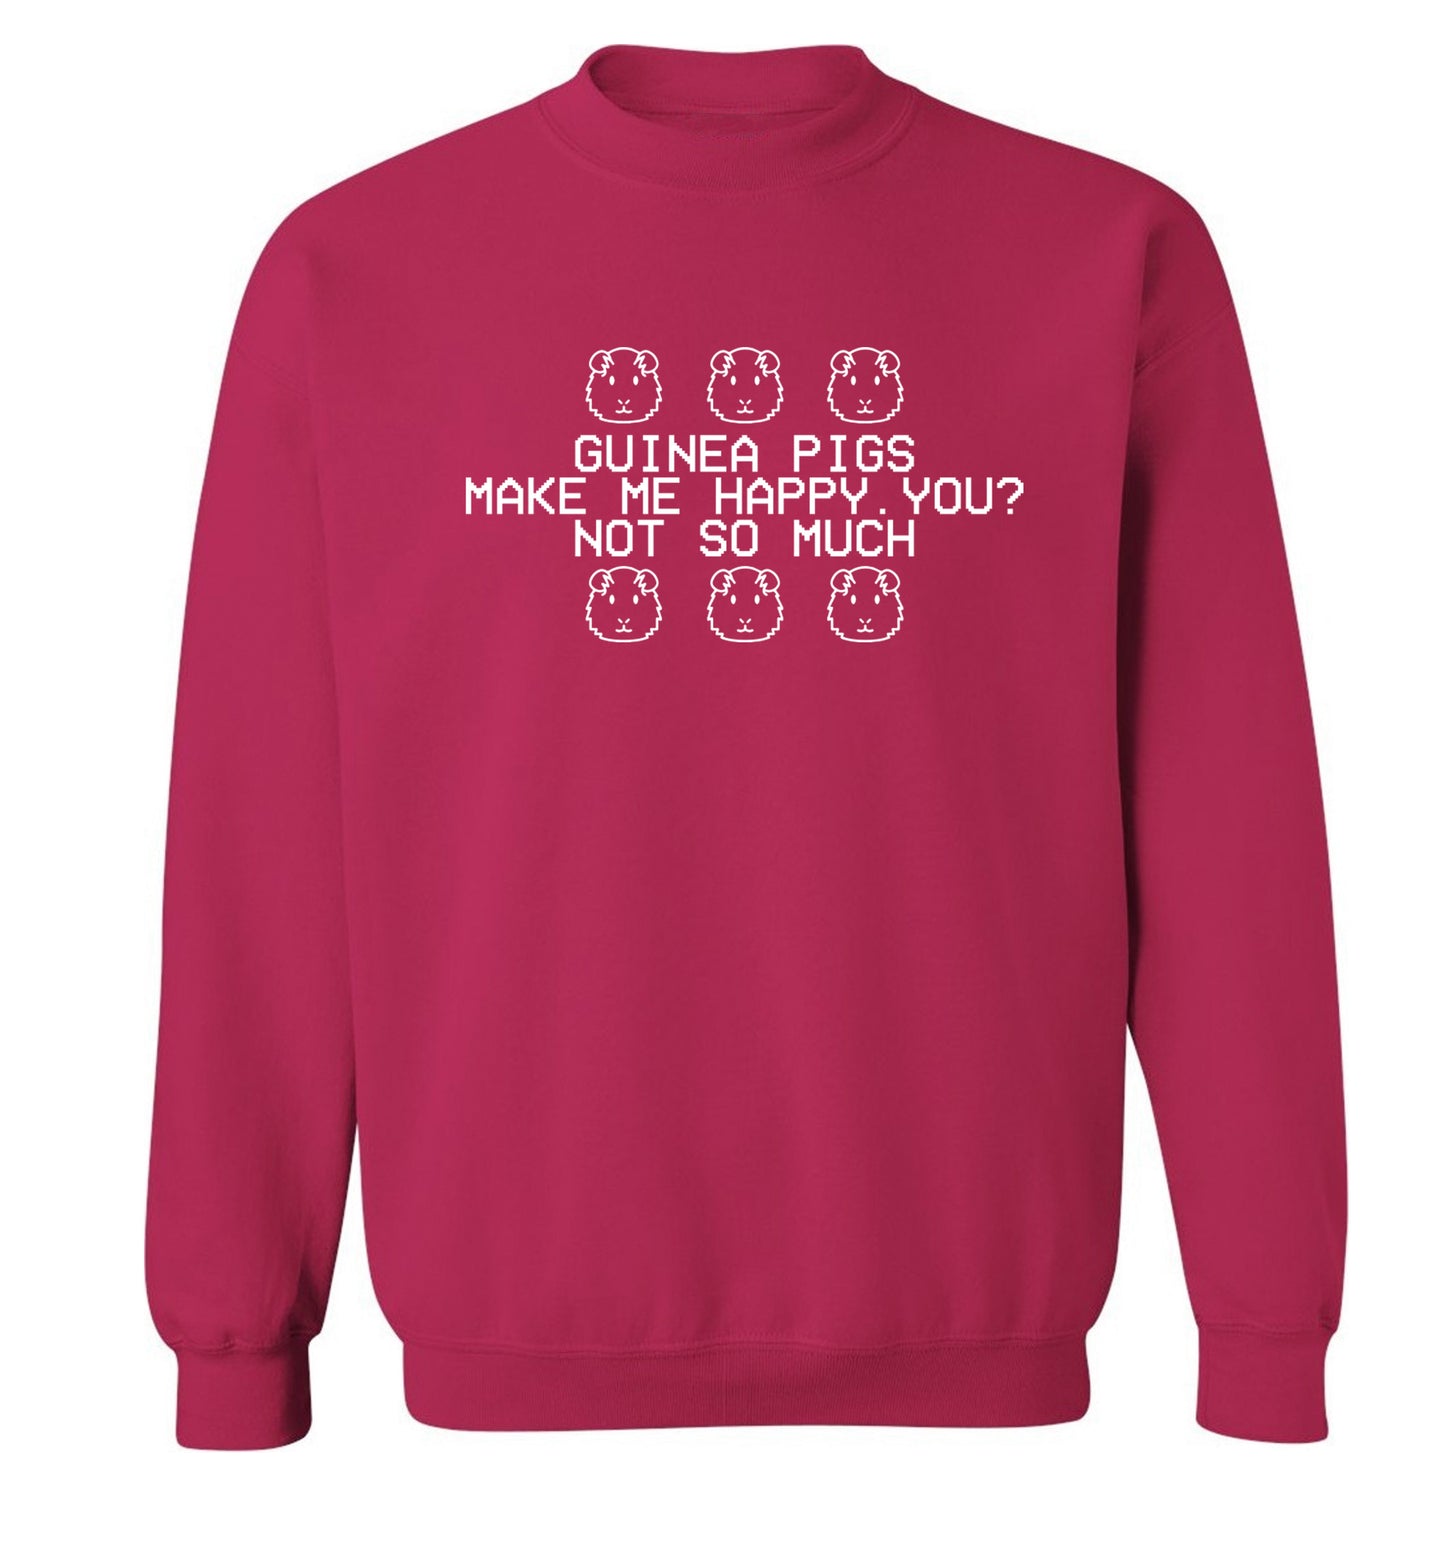 Guinea pigs make me happy, you not so much Adult's unisex pink  sweater XL